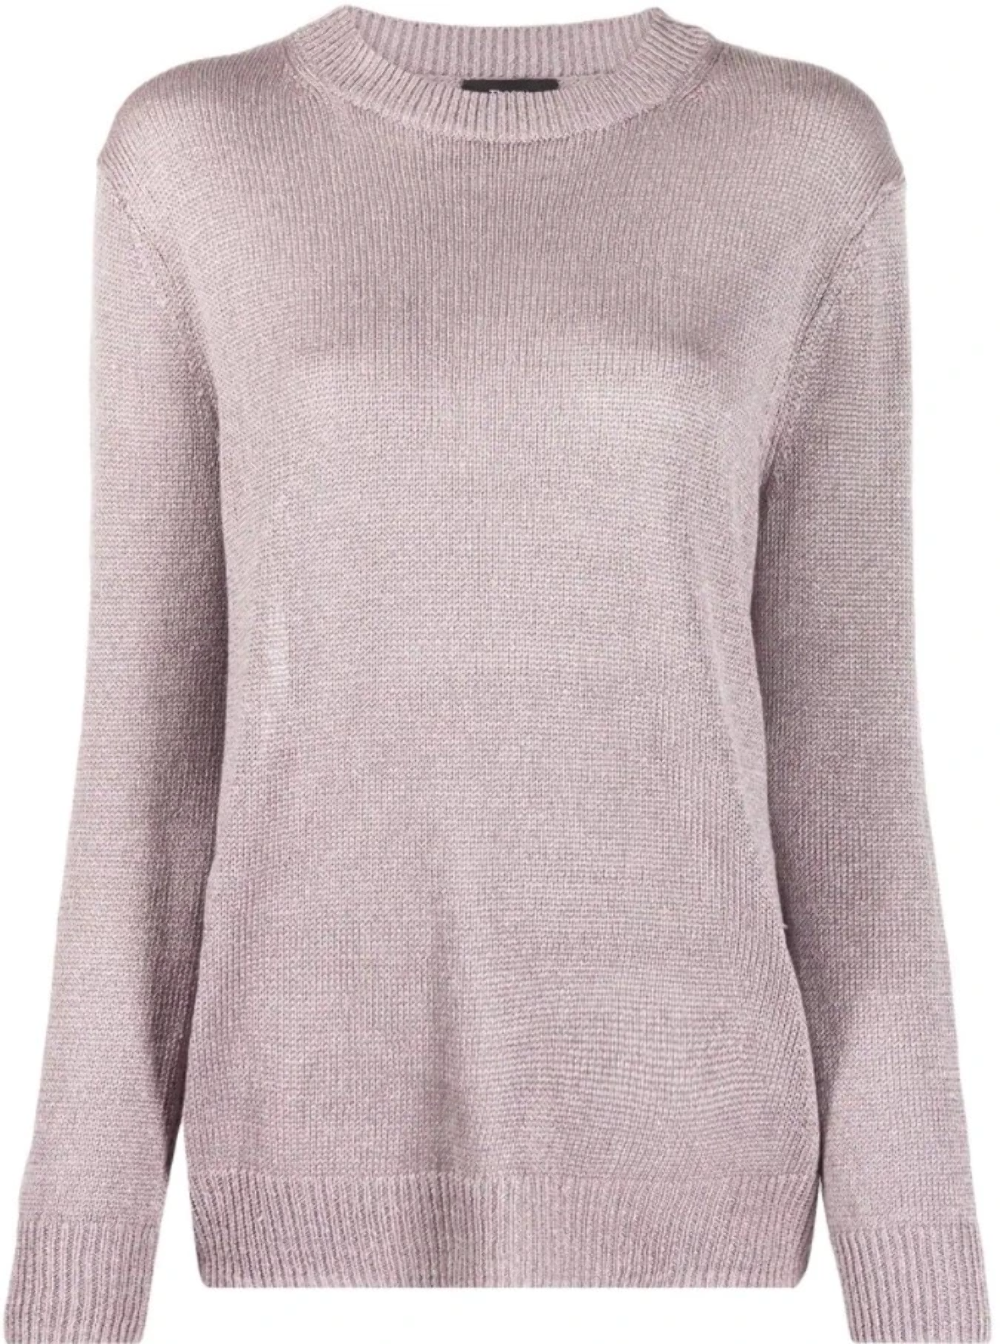 Theory Sweater Womens Large Pink Crewneck Linen Blend Relaxed Layering Top